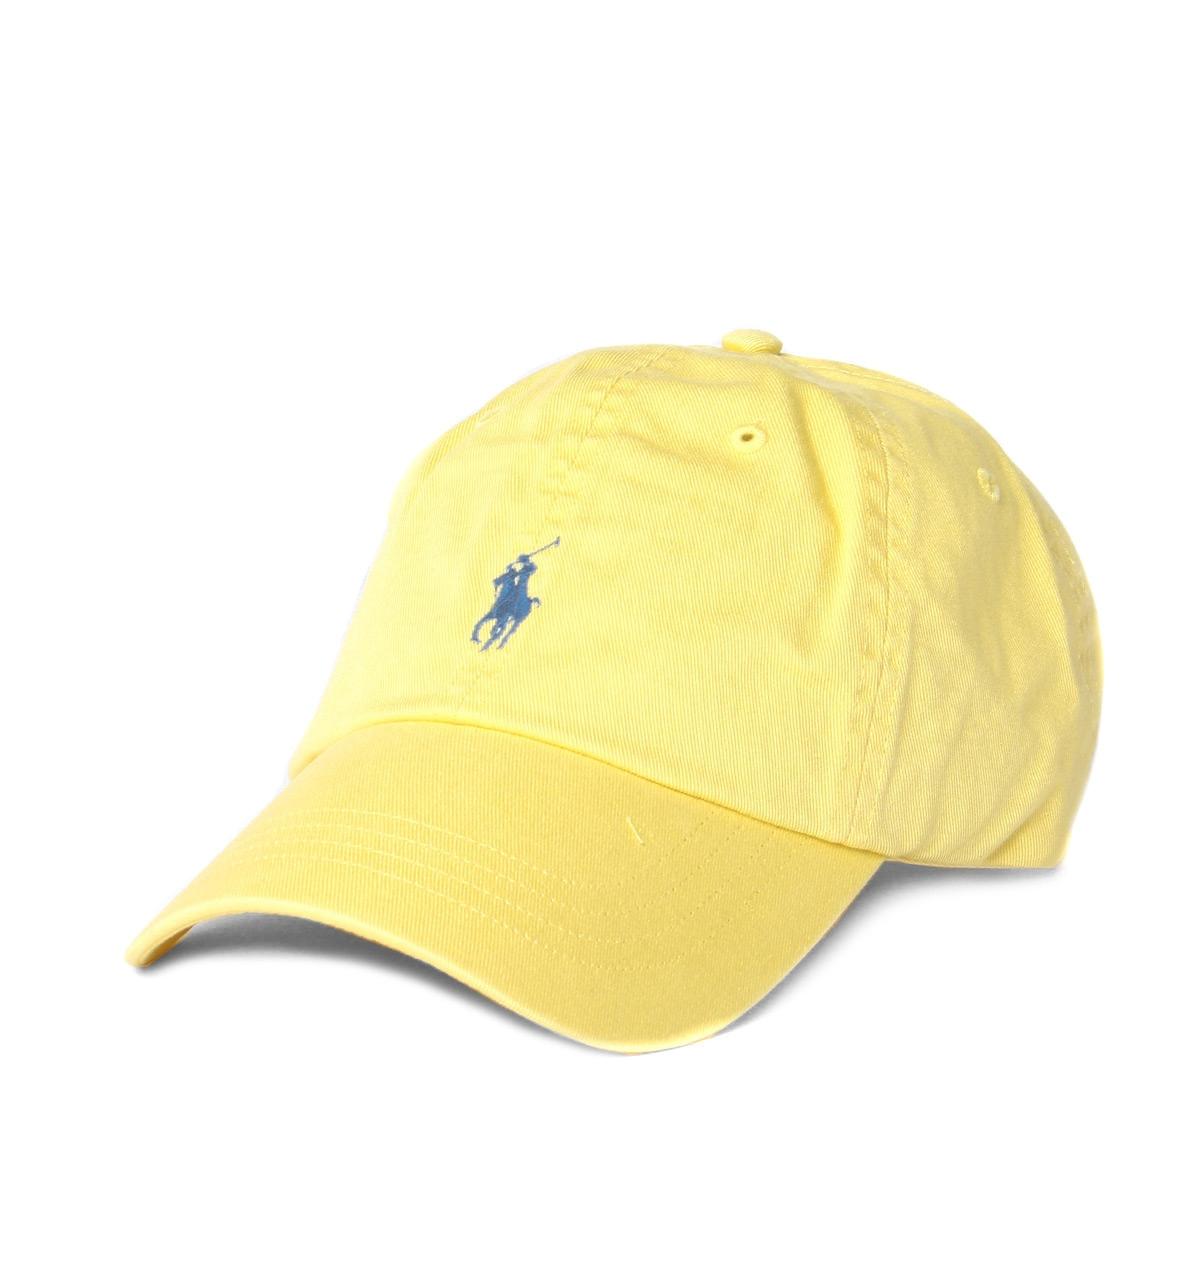 polo hat yellow